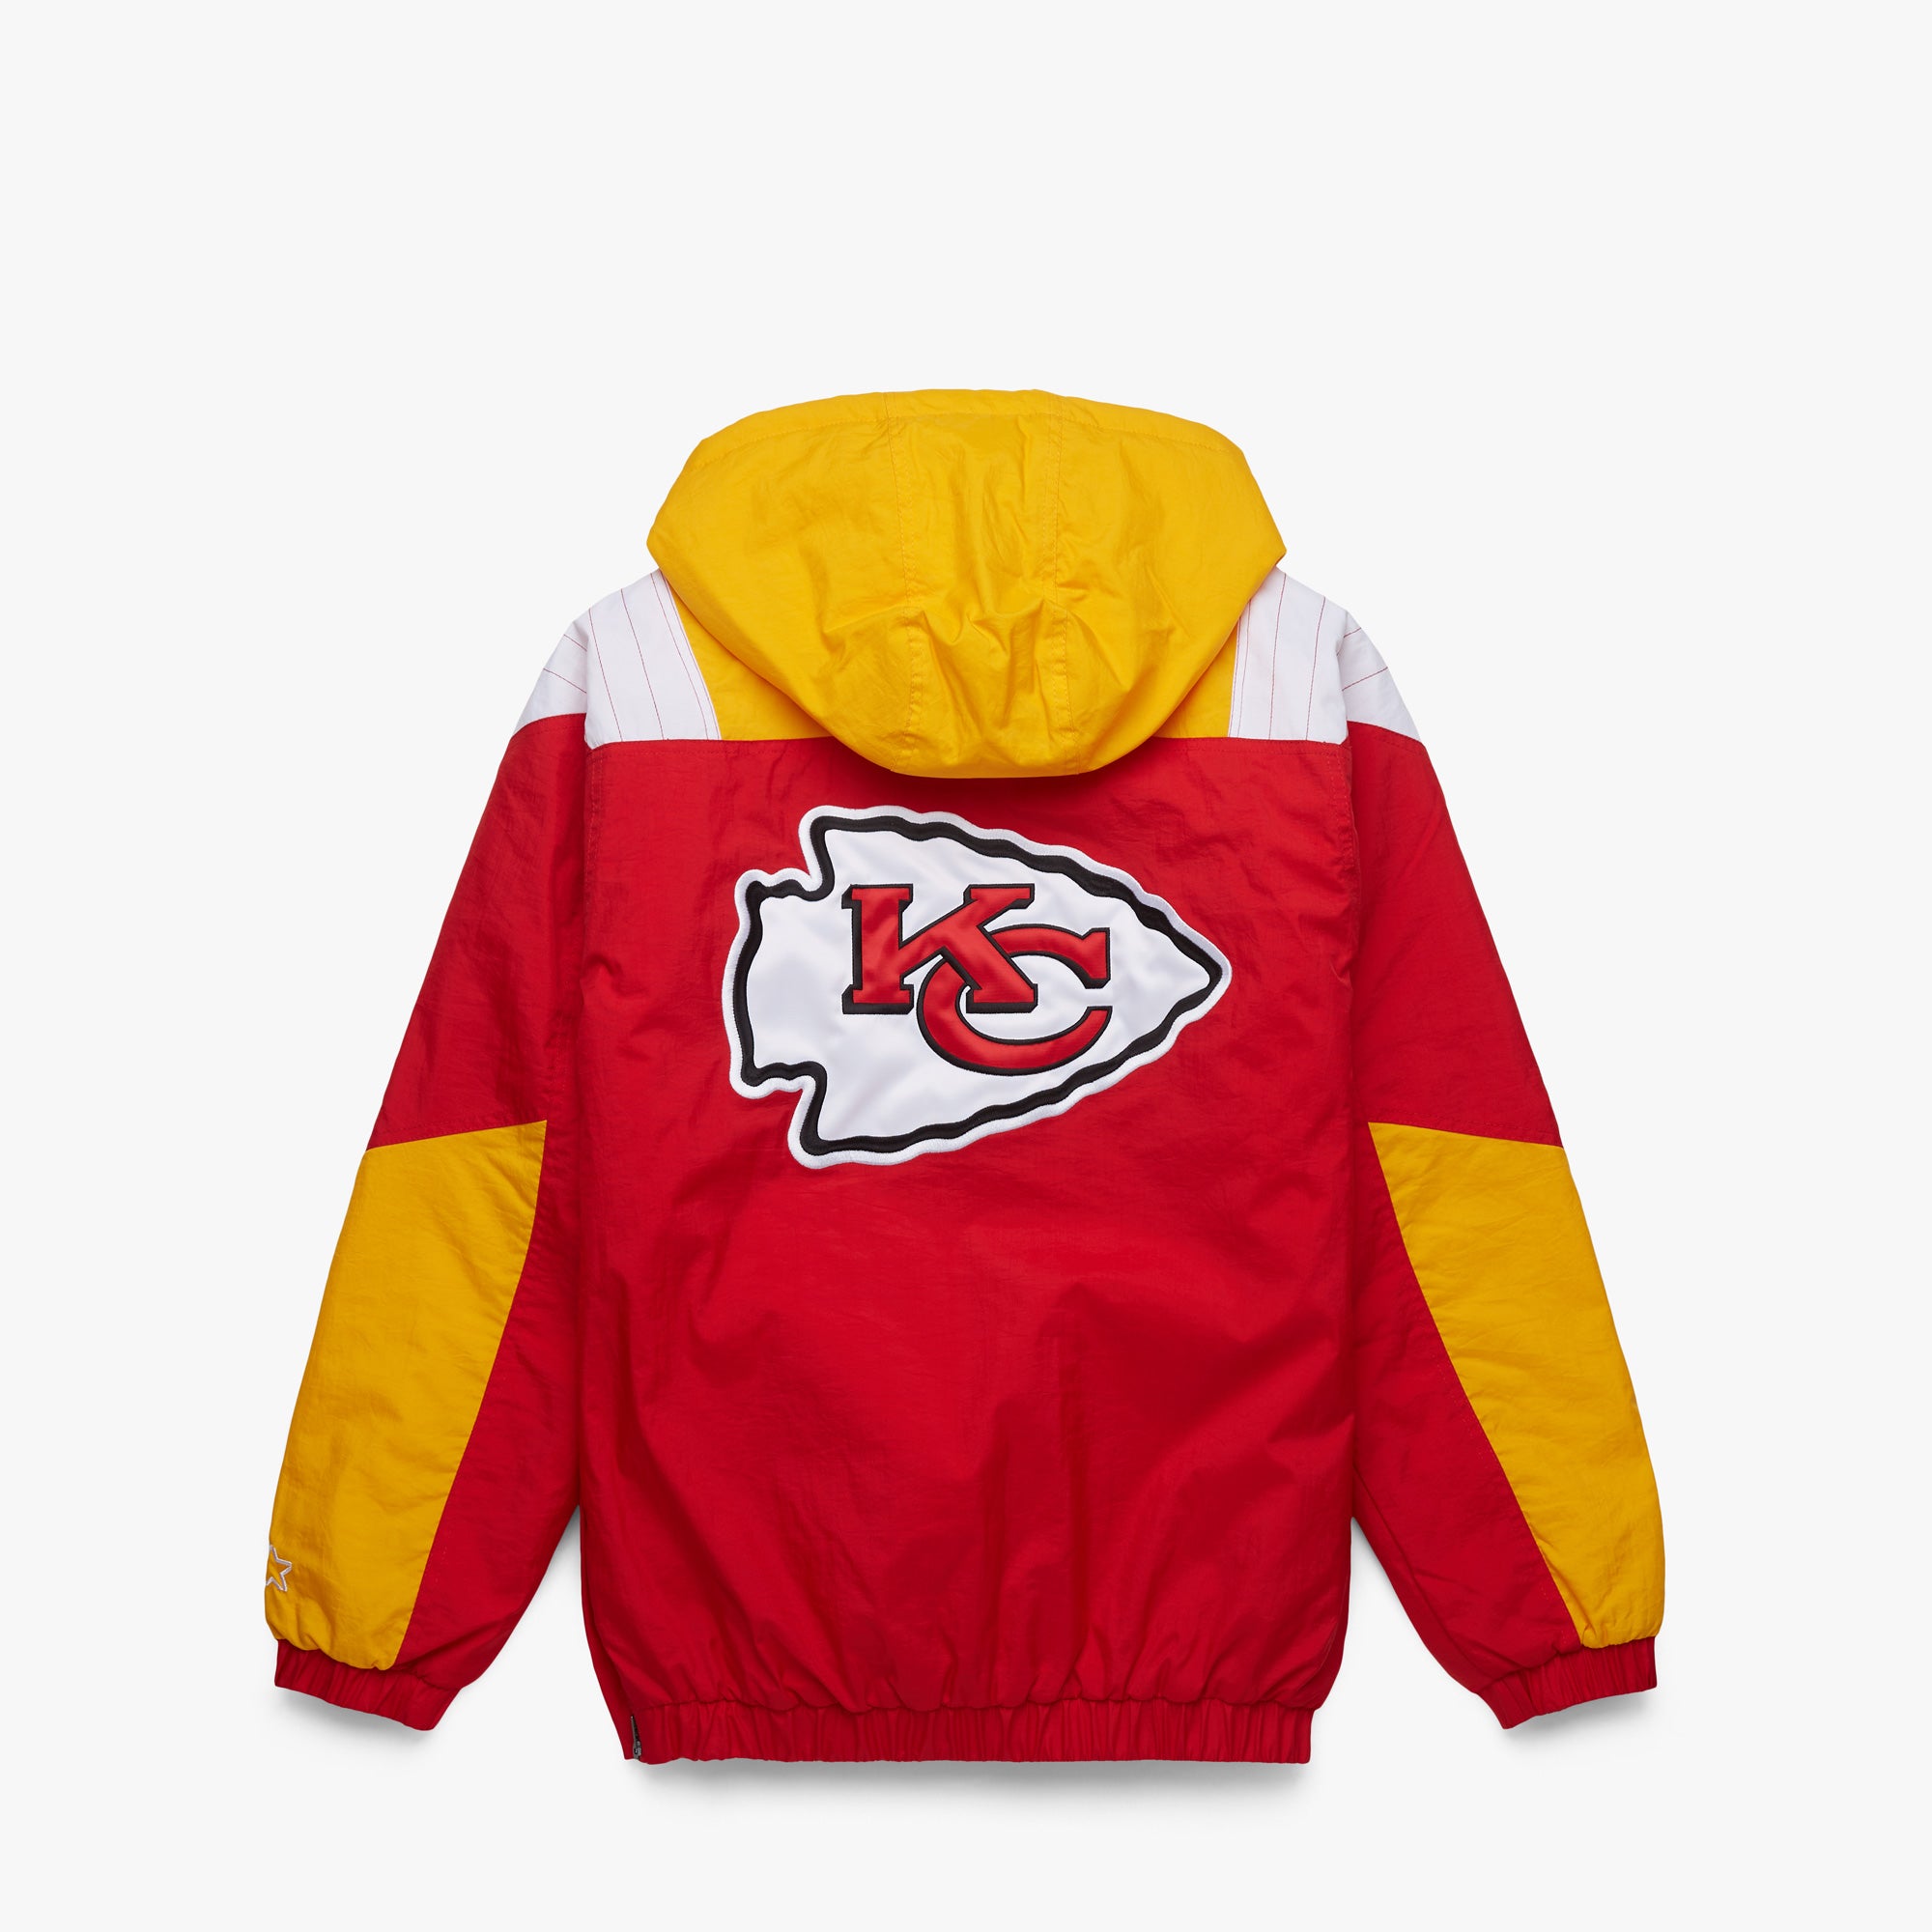 Kansas City Monarchs Hoodie from Homage. | Red | Vintage Apparel from Homage.